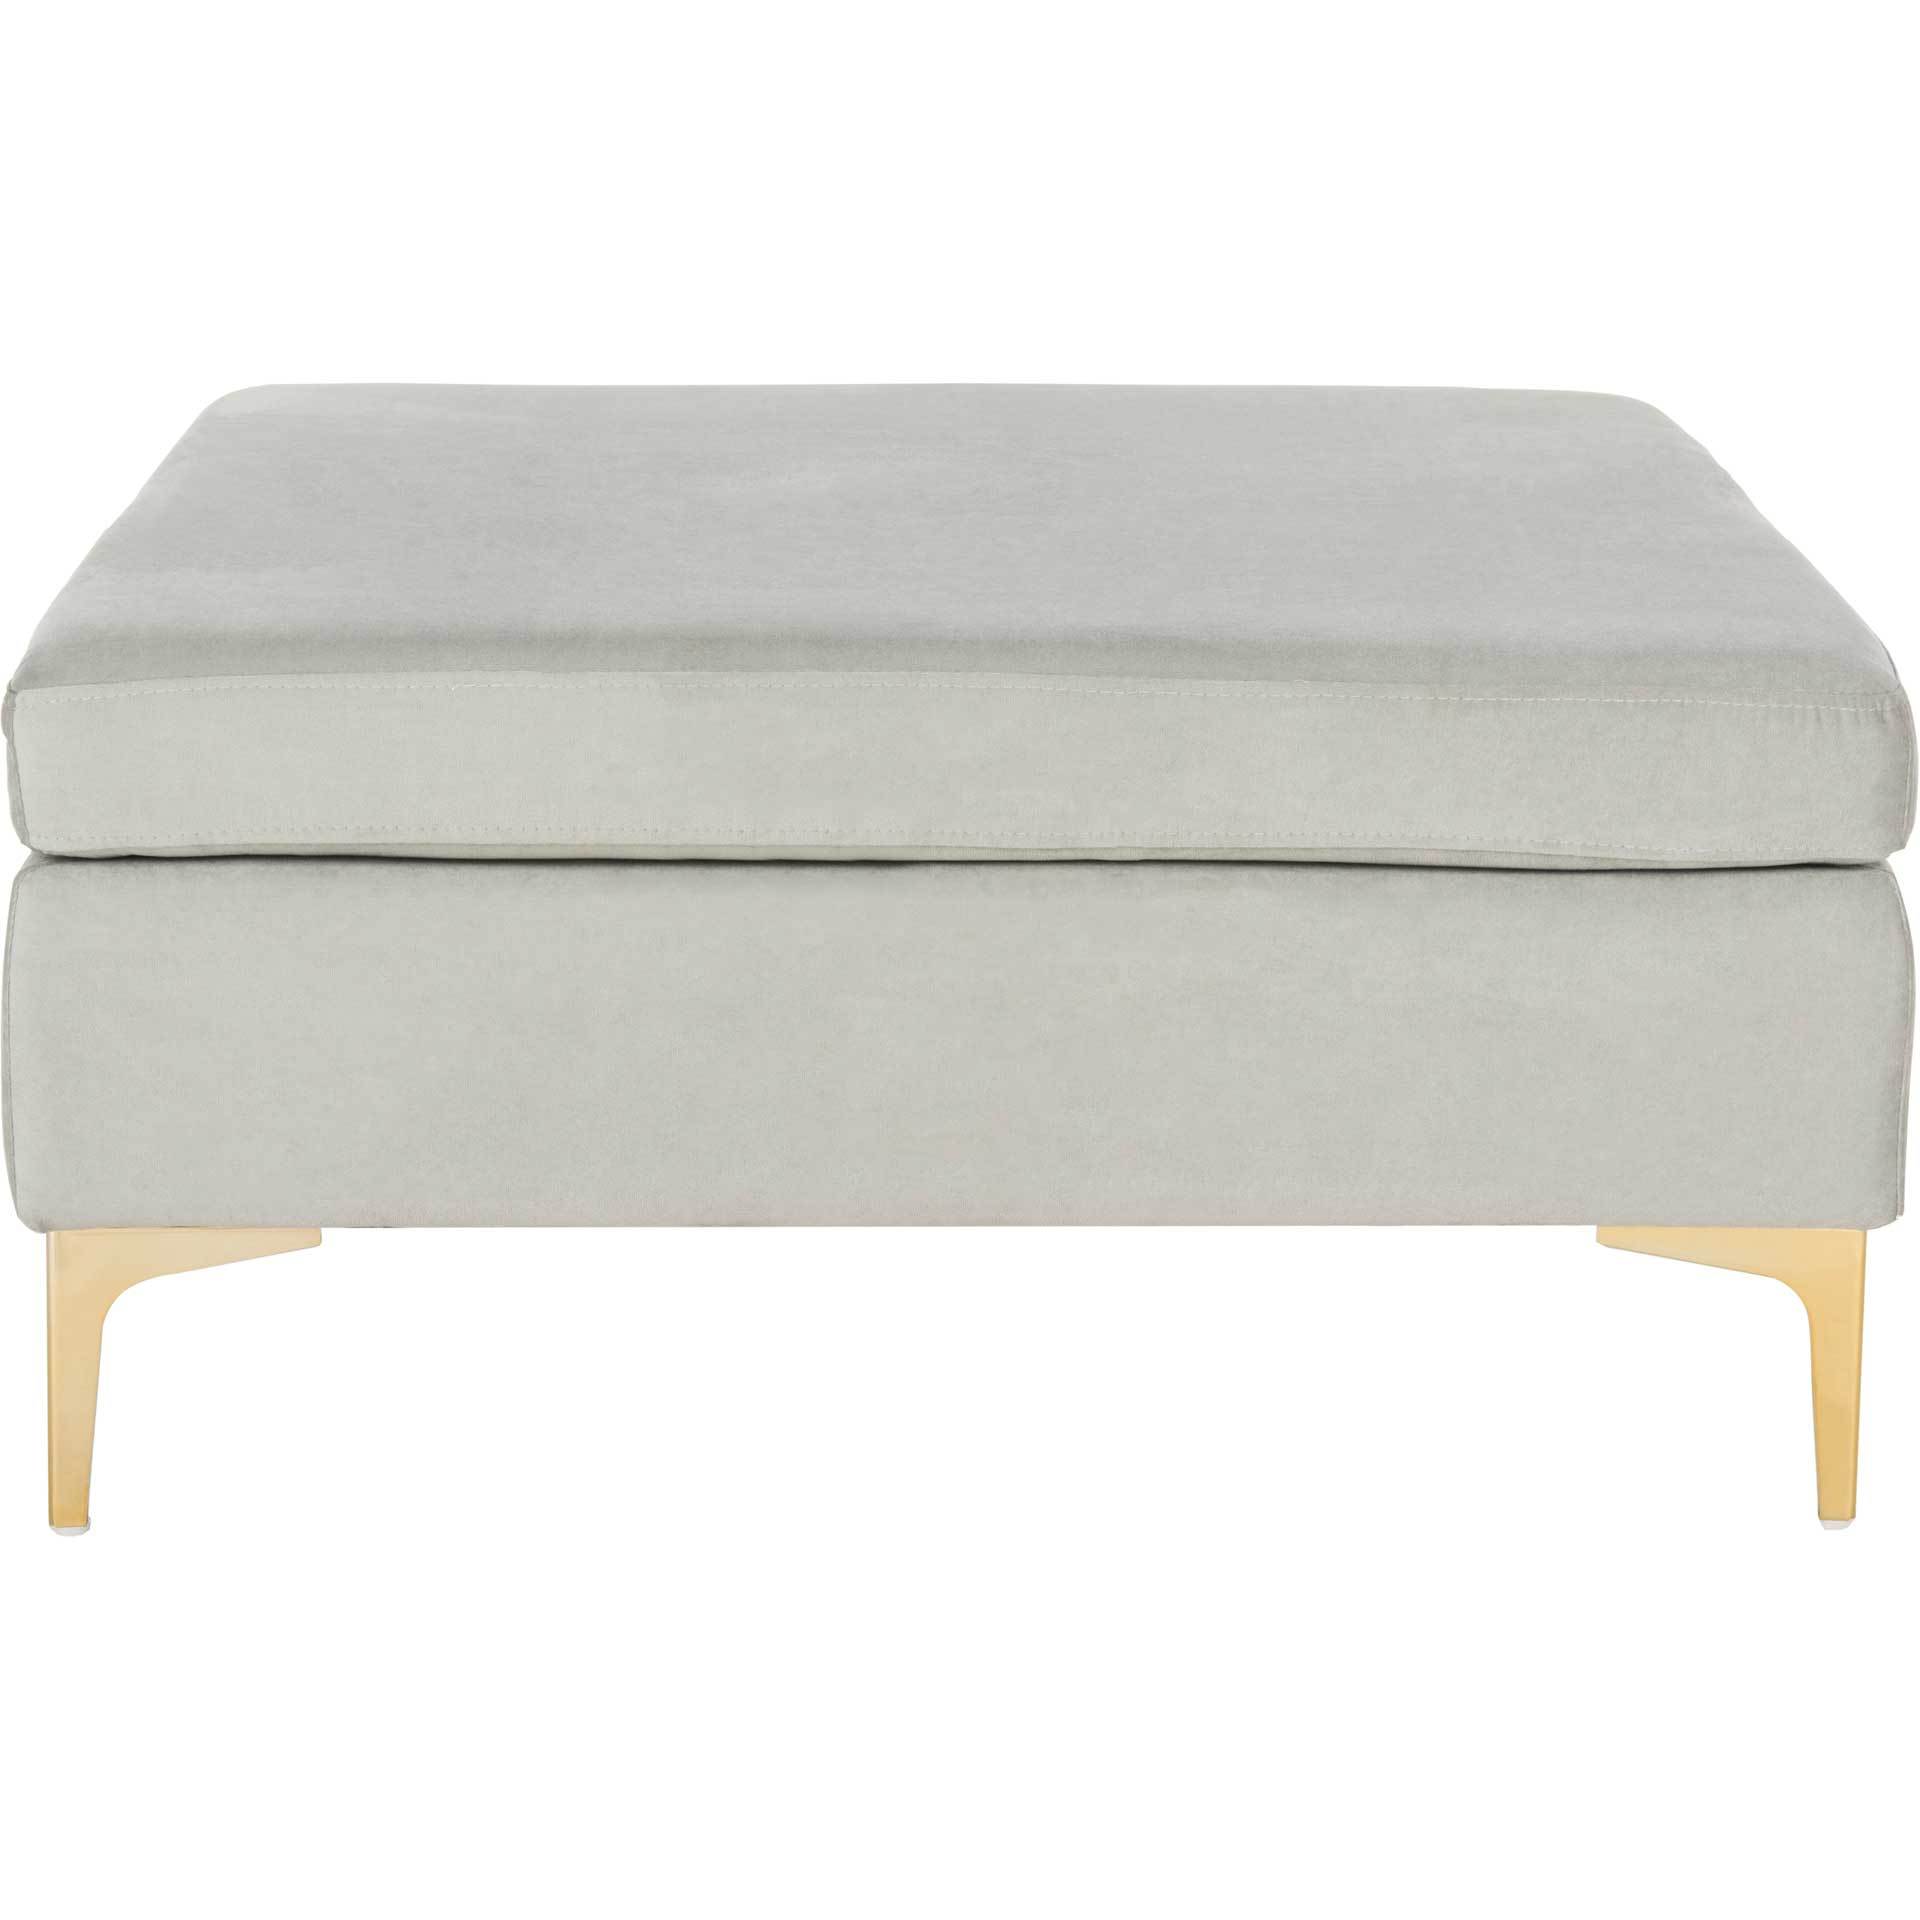 Gianni Square Bench Gray/Brass